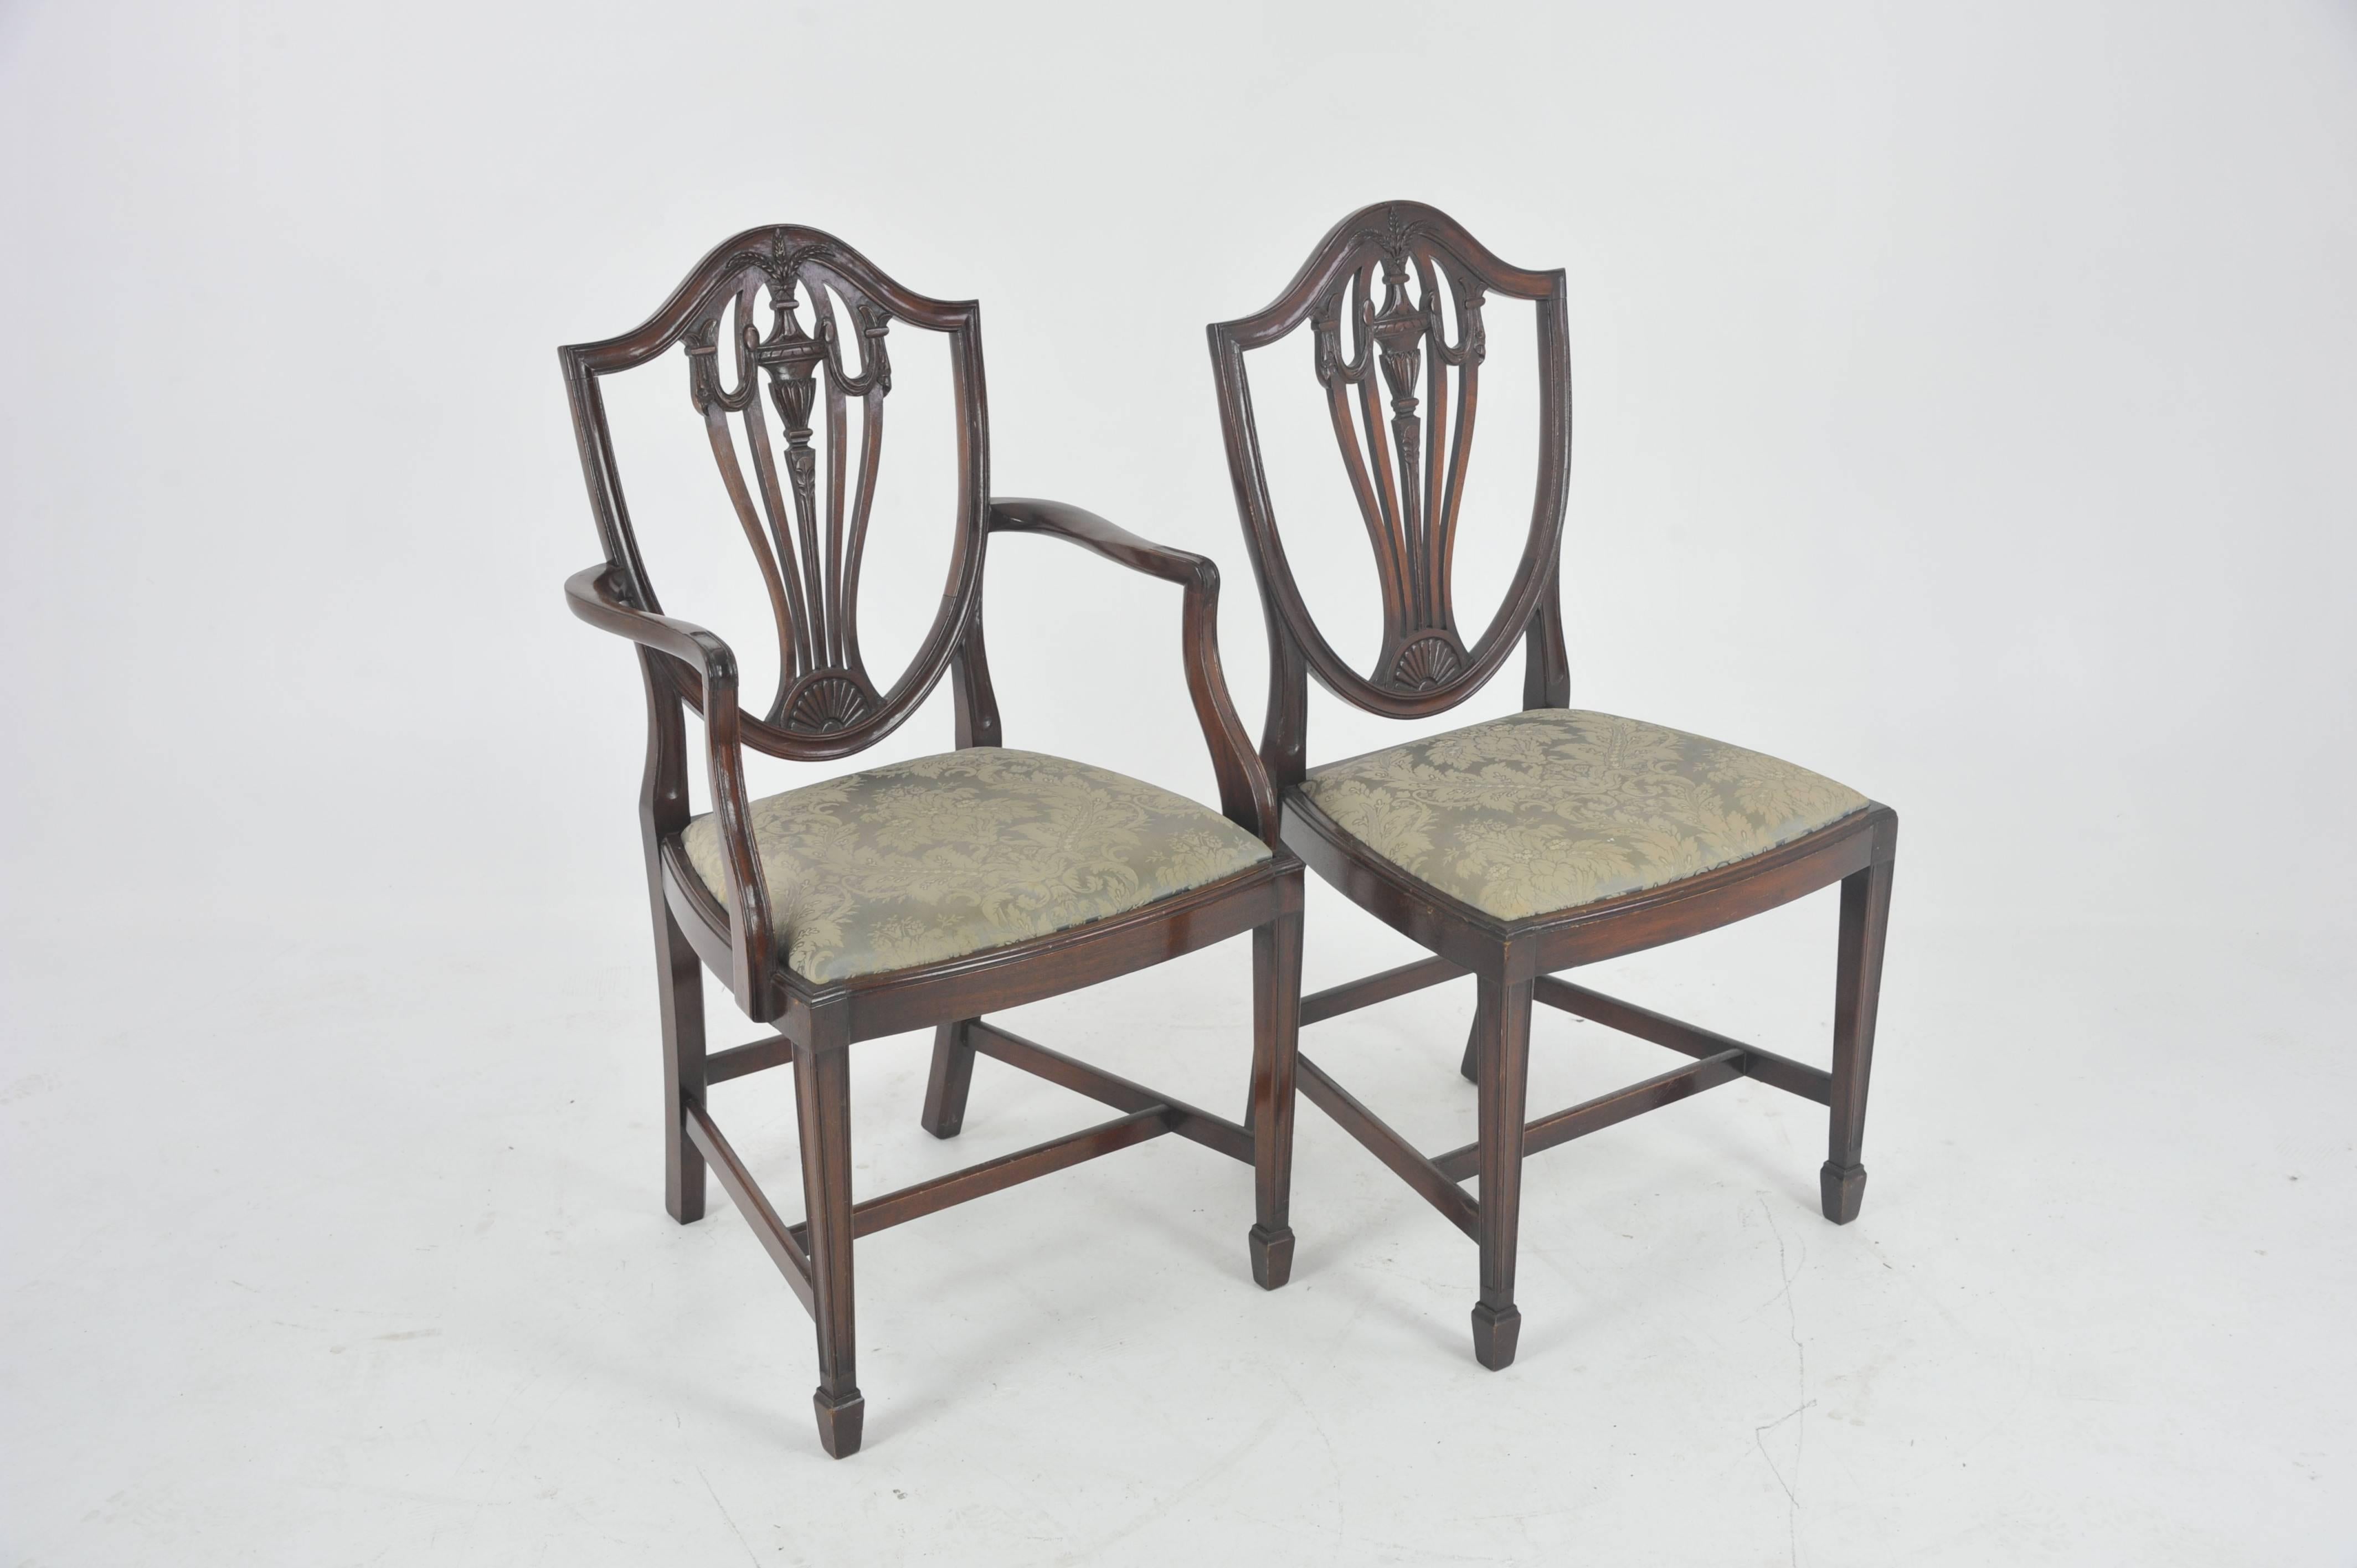 10 dining chairs, antique dining chairs, Hepplewhite chairs, mahogany, Scotland 1930, antique furniture, B1071

Scotland, 1930
Solid mahogany with original finish
The backs are well carved with wheat sheaf motif
Vertical slats
Lift out seats with